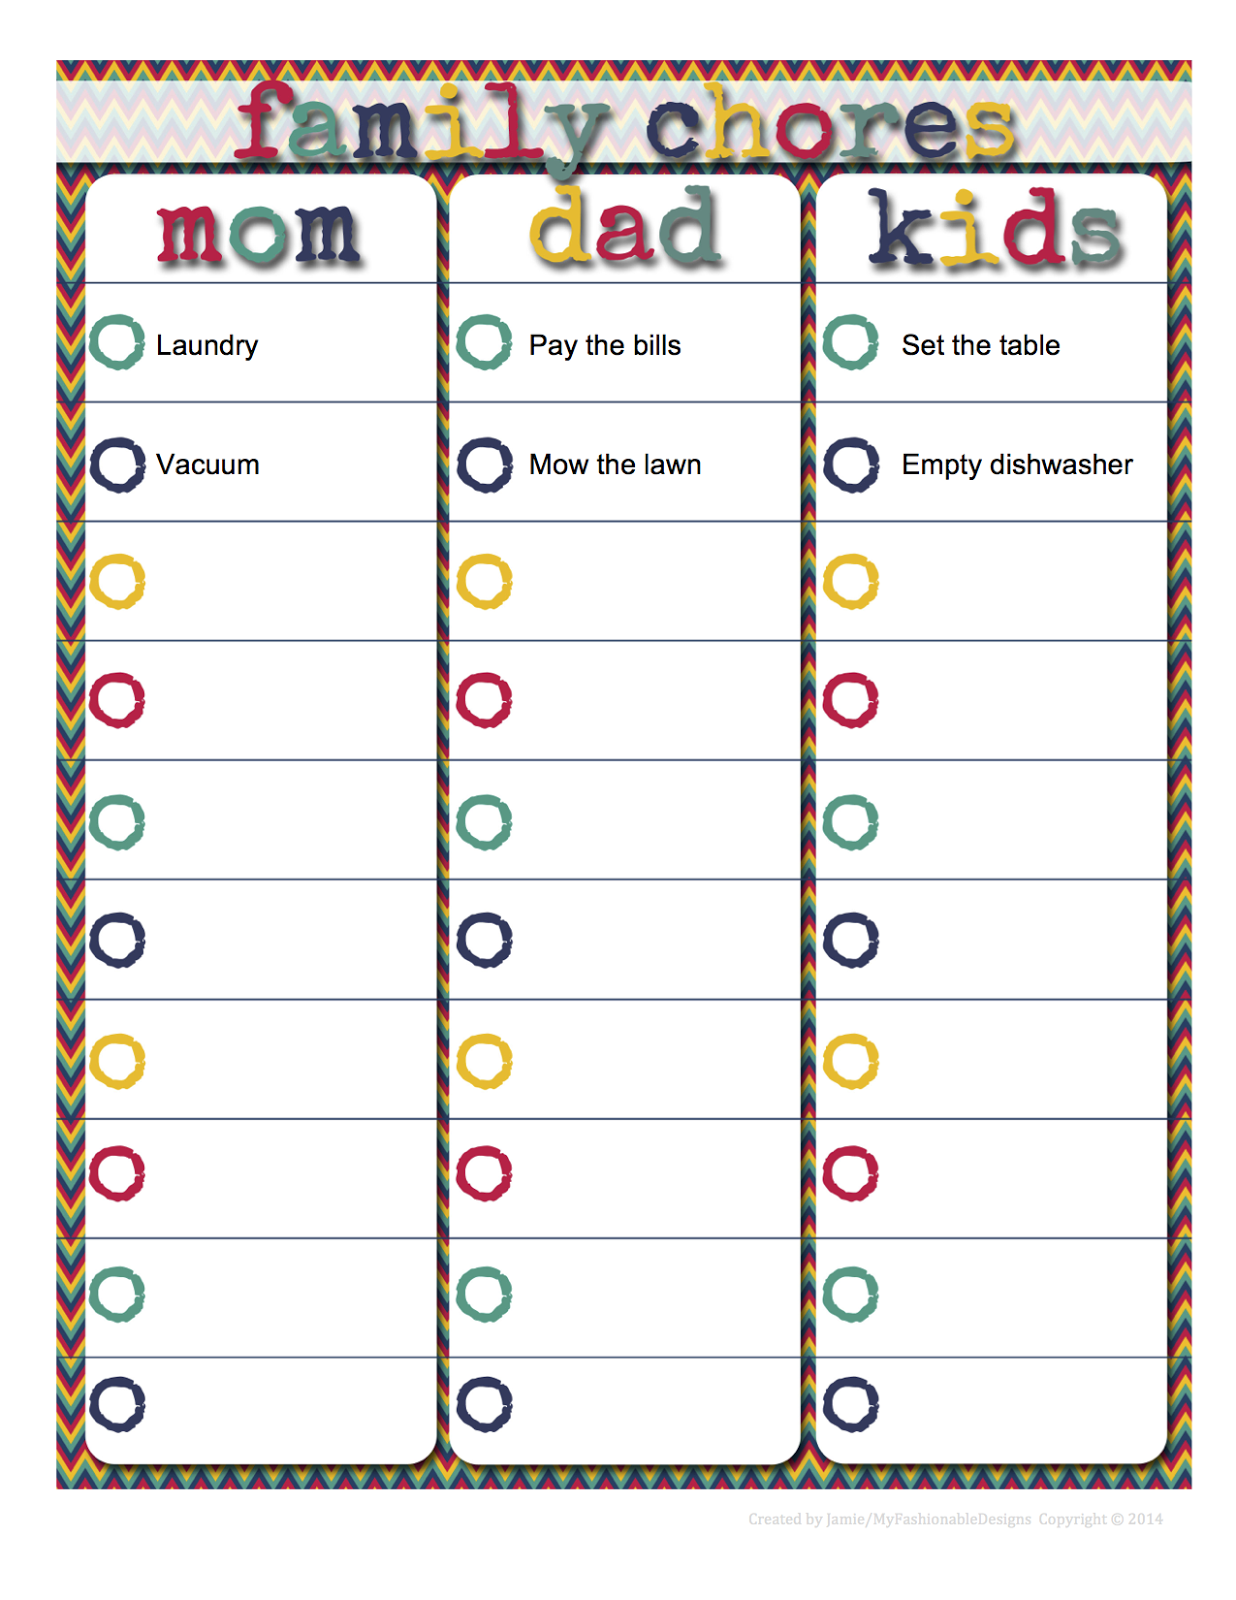 my-fashionable-designs-family-chore-chart-editable-in-word-free-download